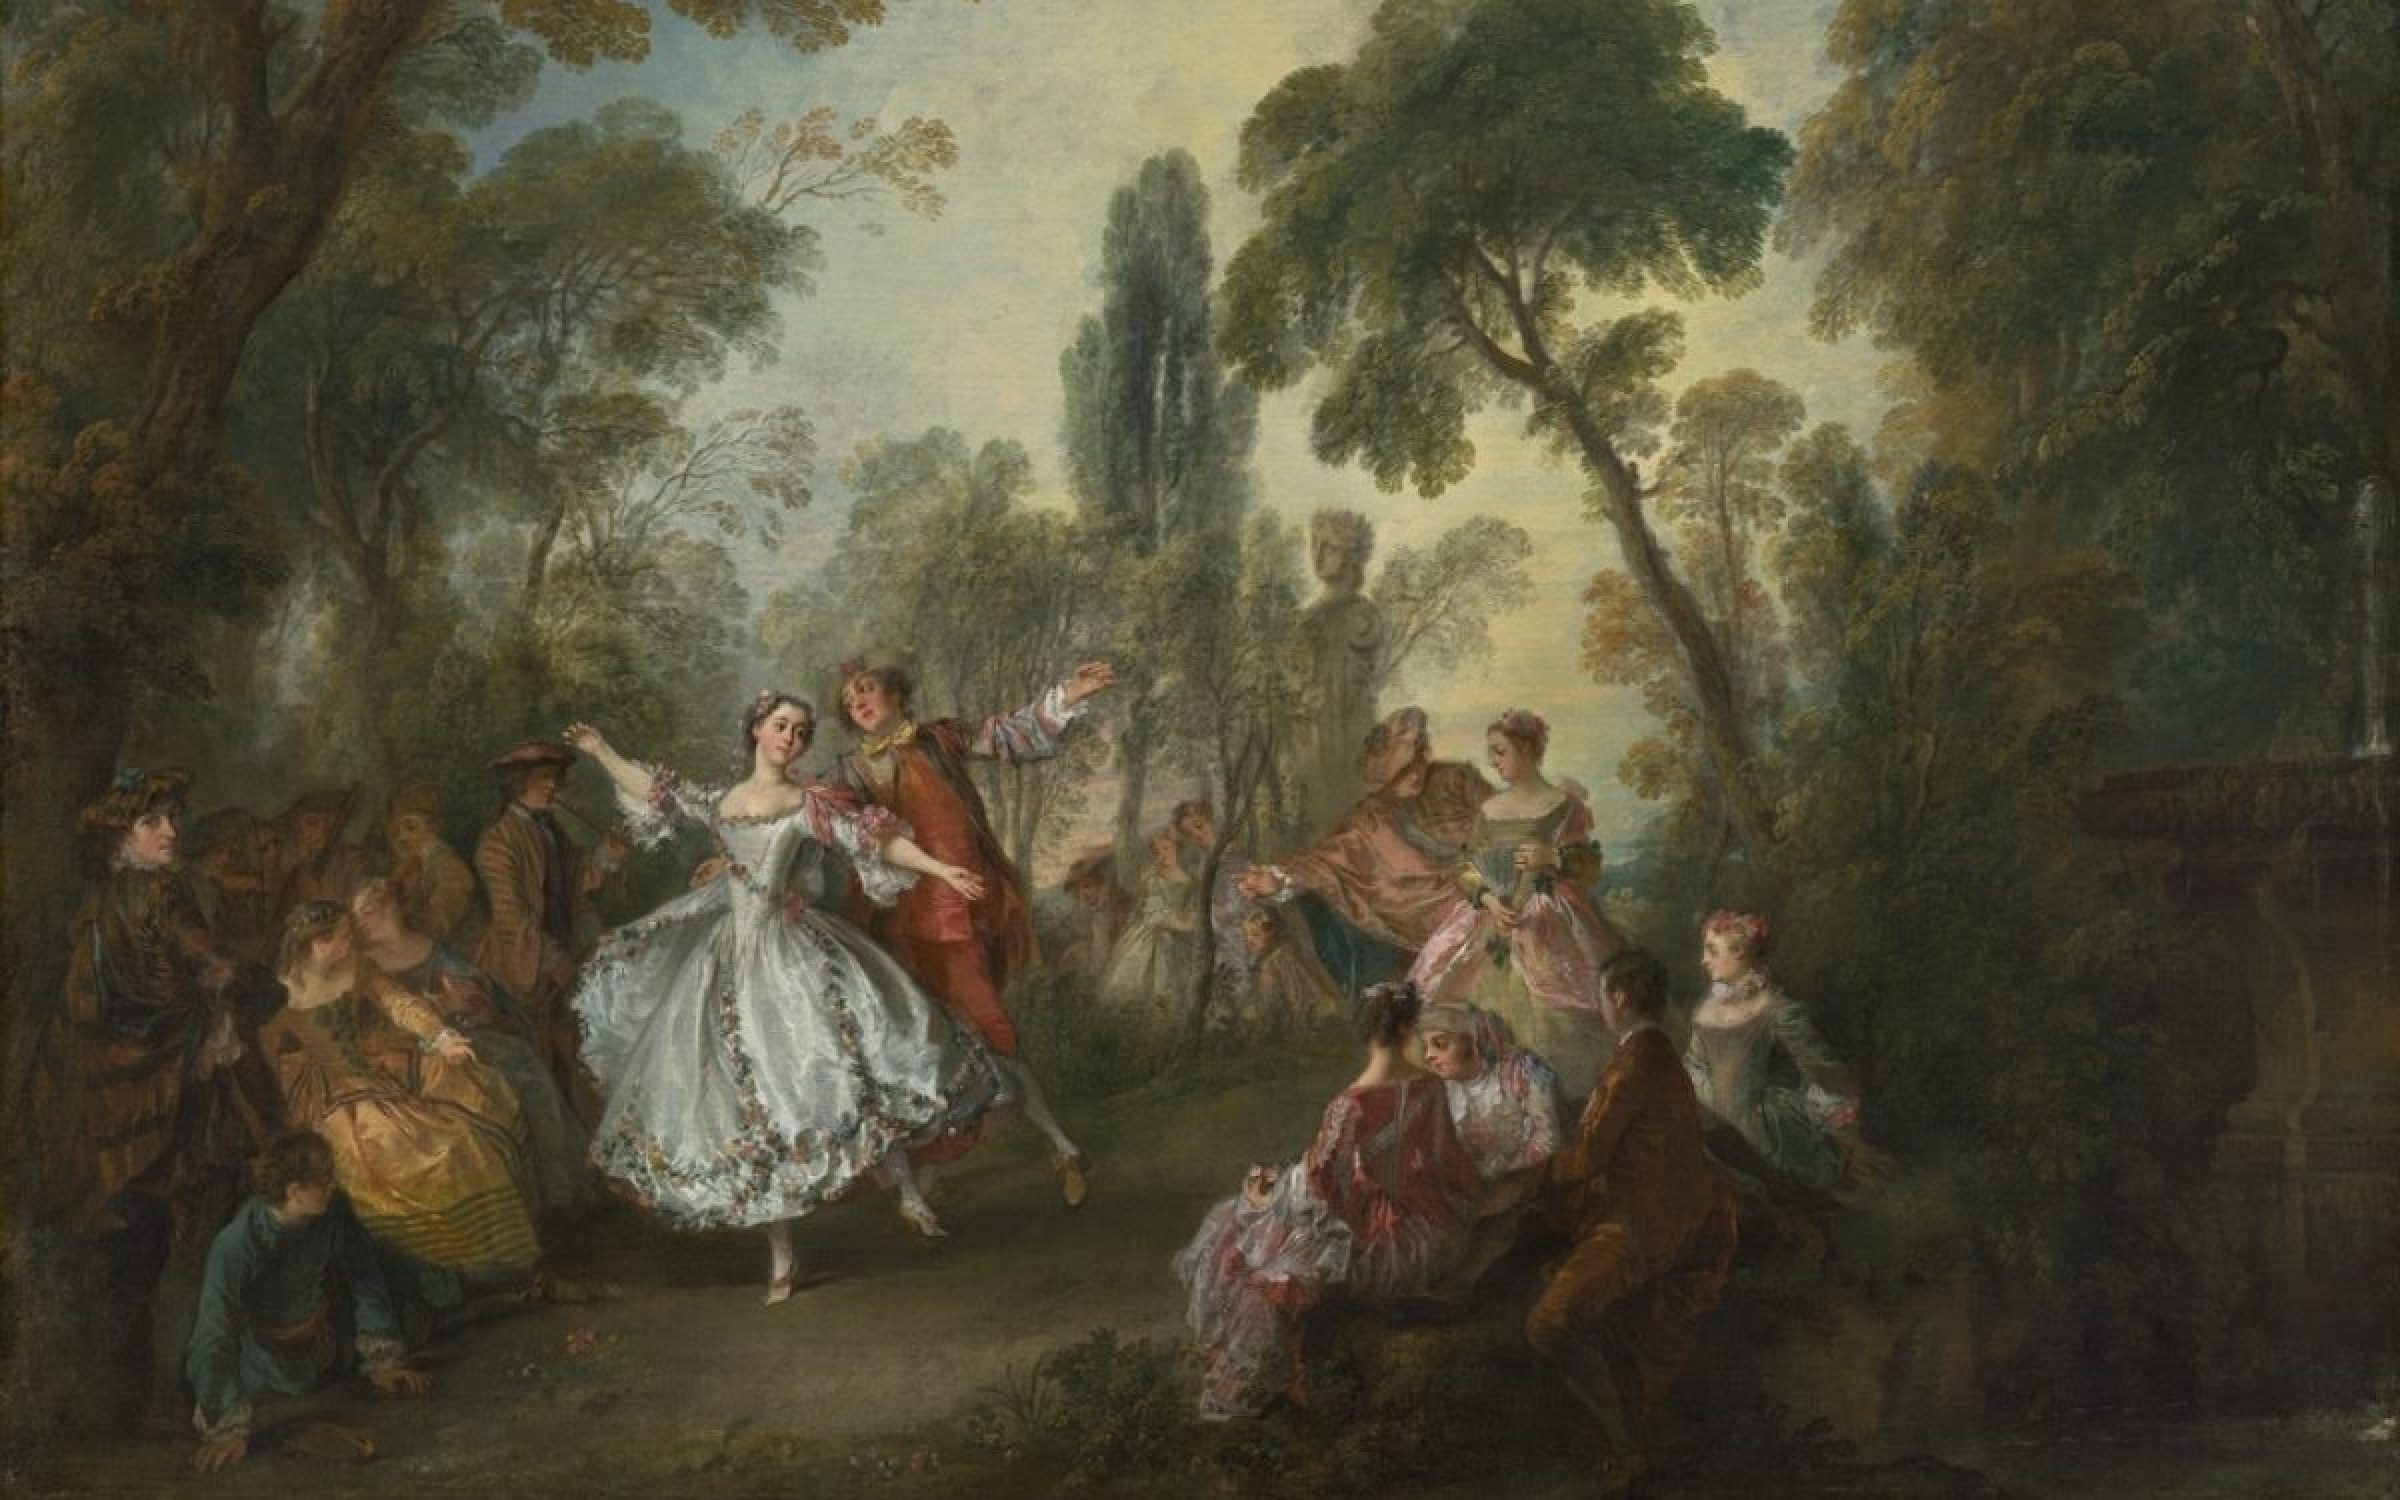 La Camargo Dancing, by Nicolas Lancret, 1730, French painting, oil on canvas. Stylishly dressed spectators assembled in small groups to watch a couple perform a pas de deux. The female dancer depicte